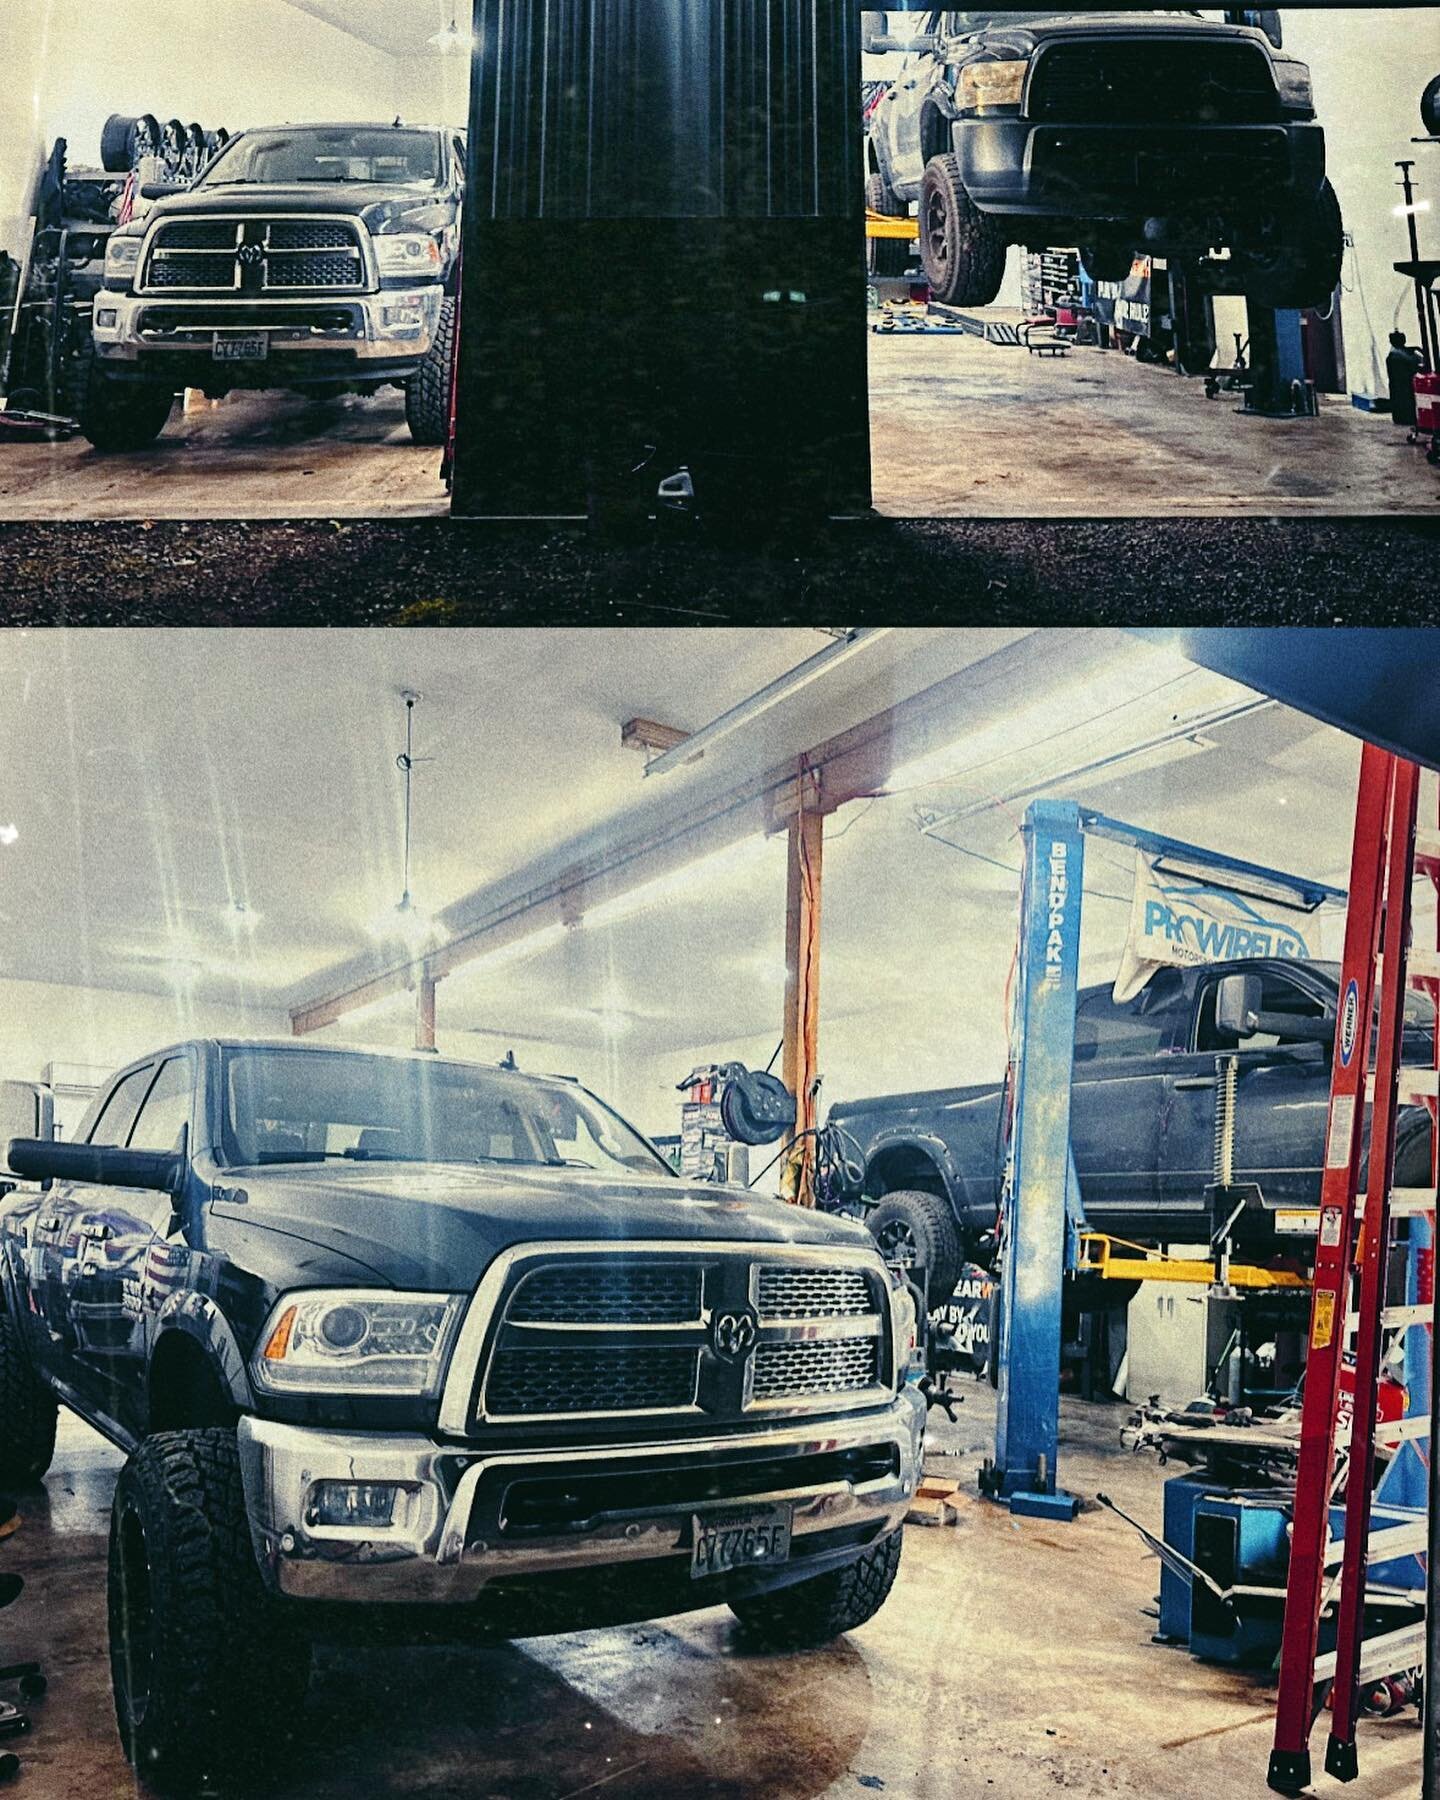 Been working with a lot of Turbo Diesel&rsquo;s lately in the shop - changing lots of fuel filters, oil &amp; transmission pan gaskets, fluids galore, brakes, diff servicing, wheel bearings and more #zwinghq #diesel #dodgeram